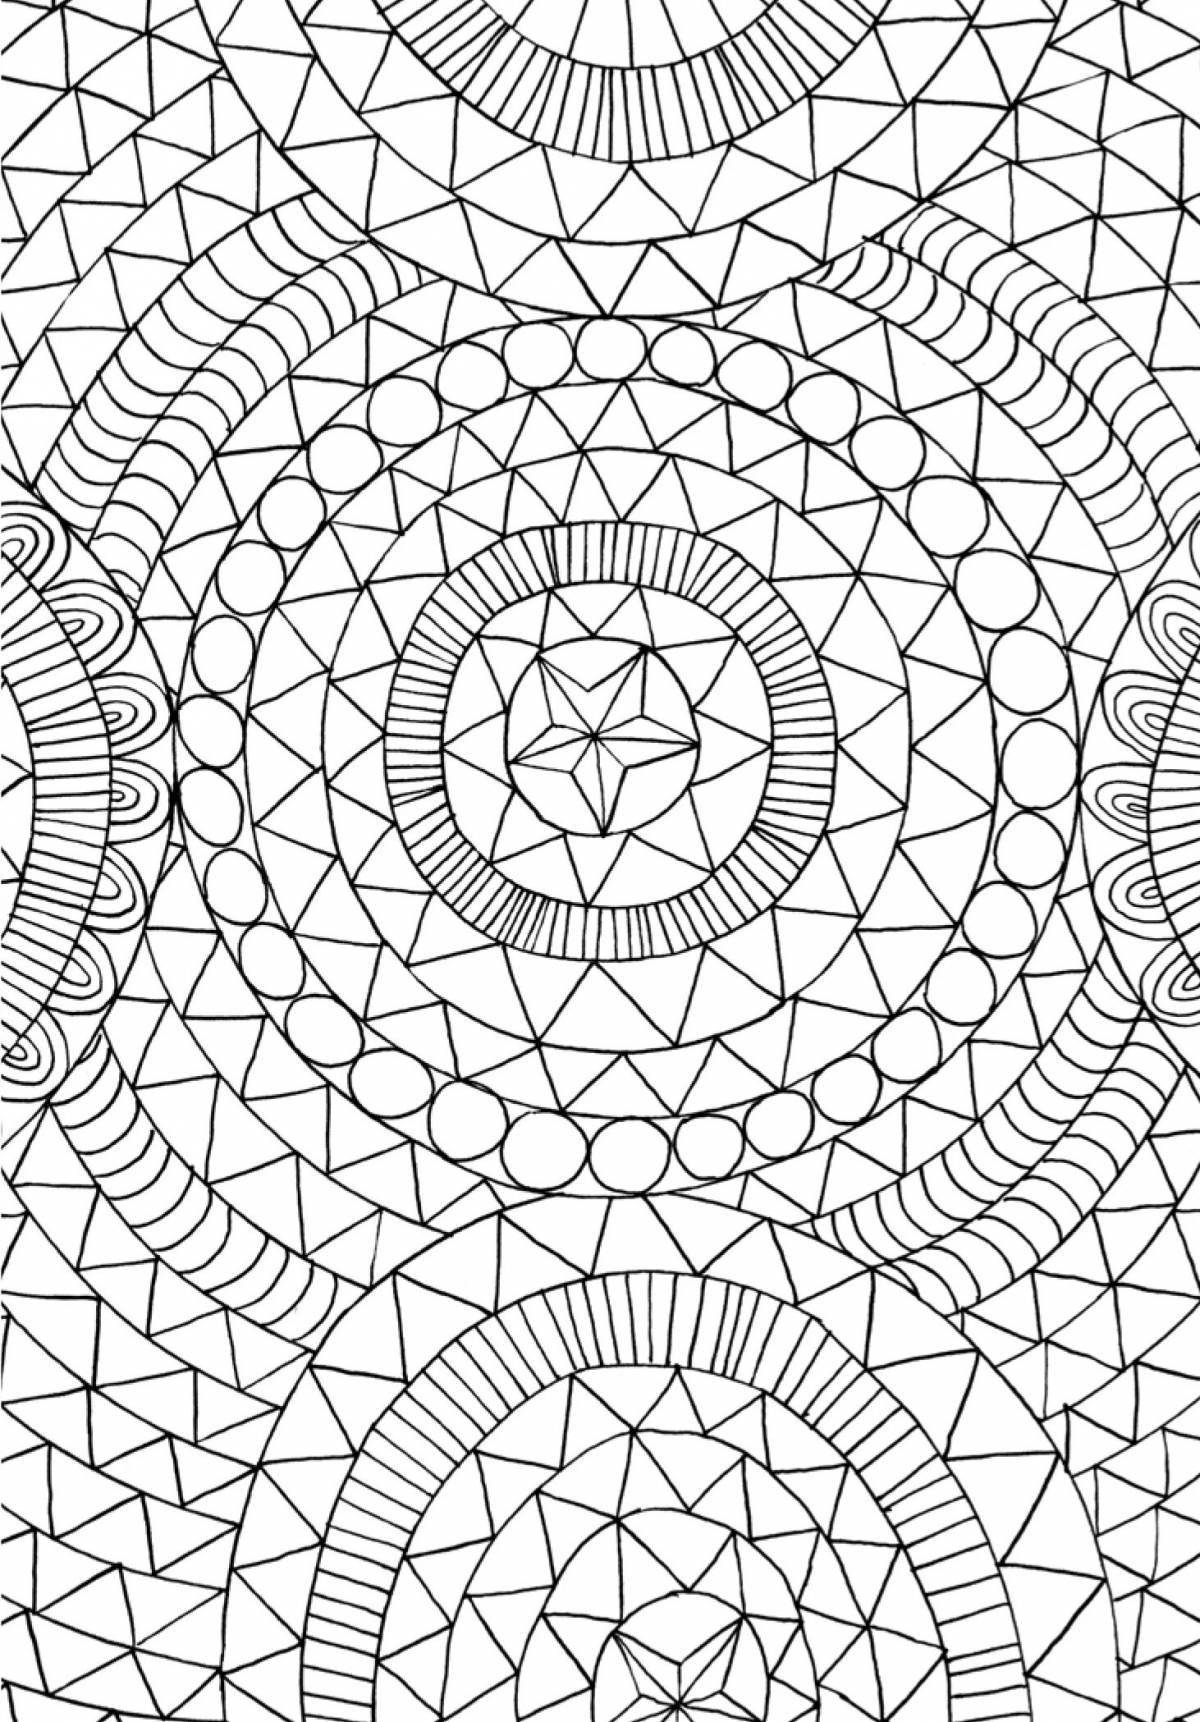 Joyful coloring to relax the nervous system